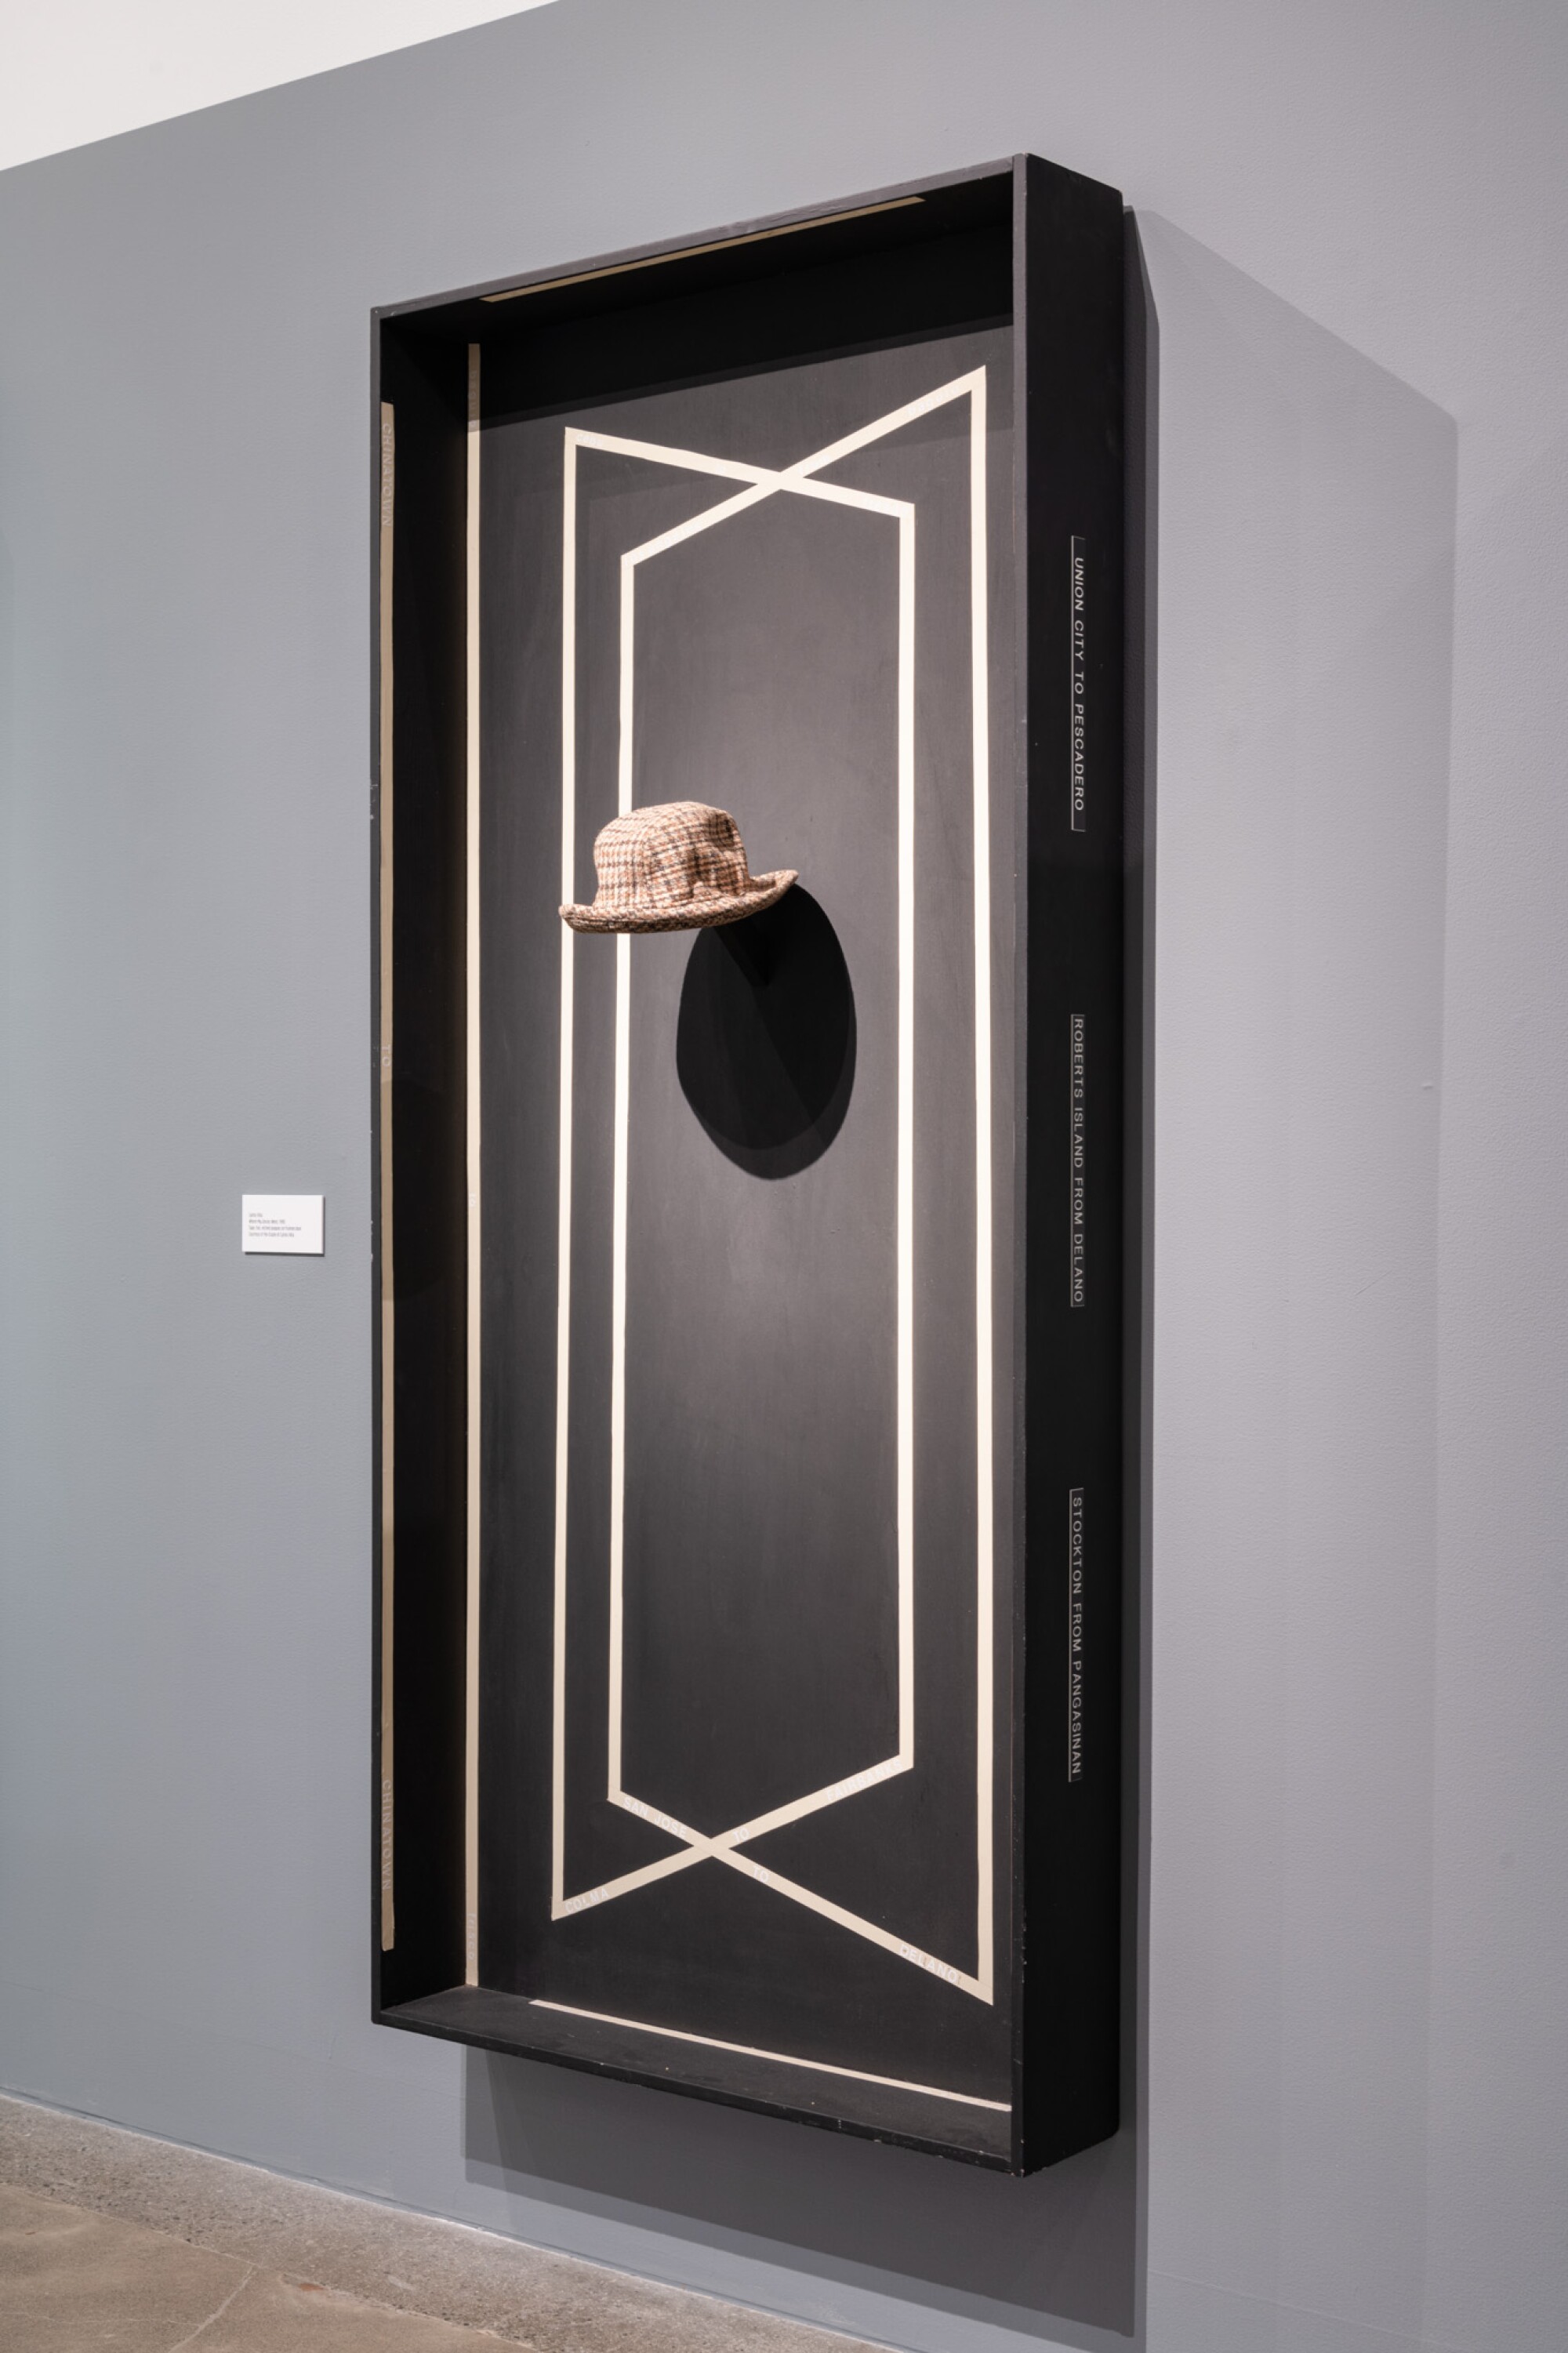 A wall sculpture by Carlos Villa shows a man's fedora suspended before a black panel that resembles a doorway.